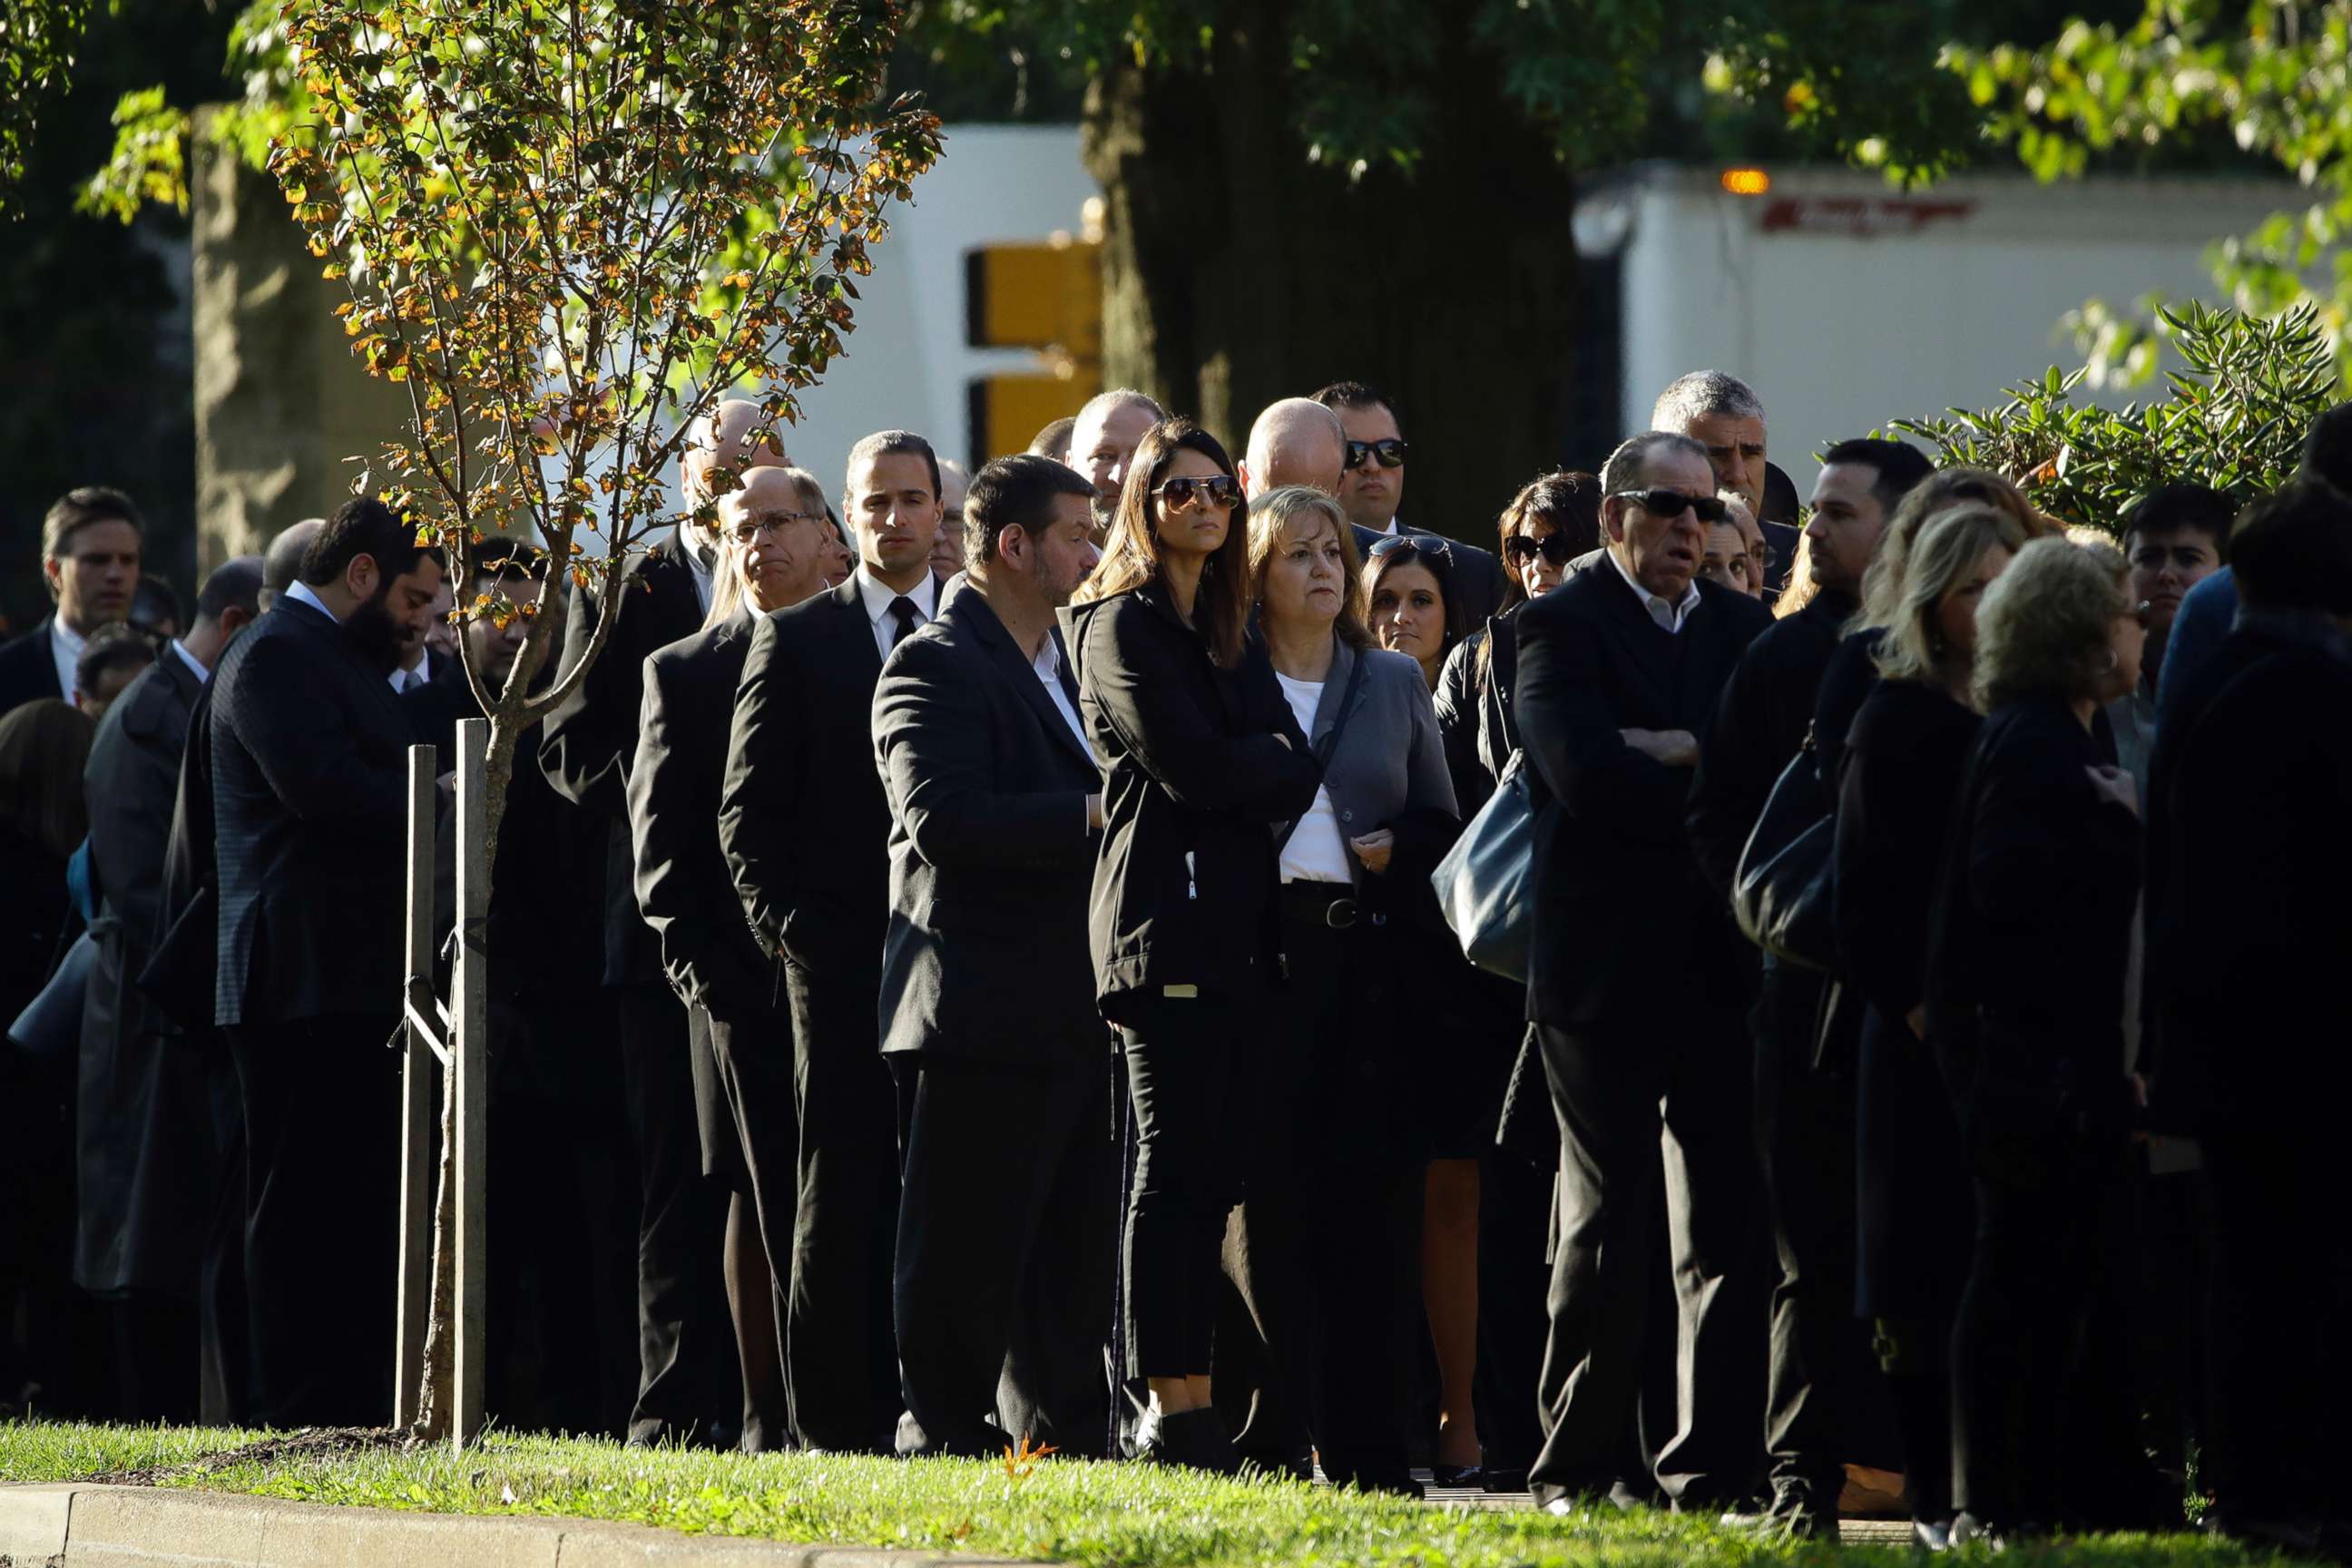 PHOTO: Mourners gather outside Rodef Shalom Congregation before the funeral services for brothers Cecil and David Rosenthal, Oct. 30, 2018, in Pittsburgh.